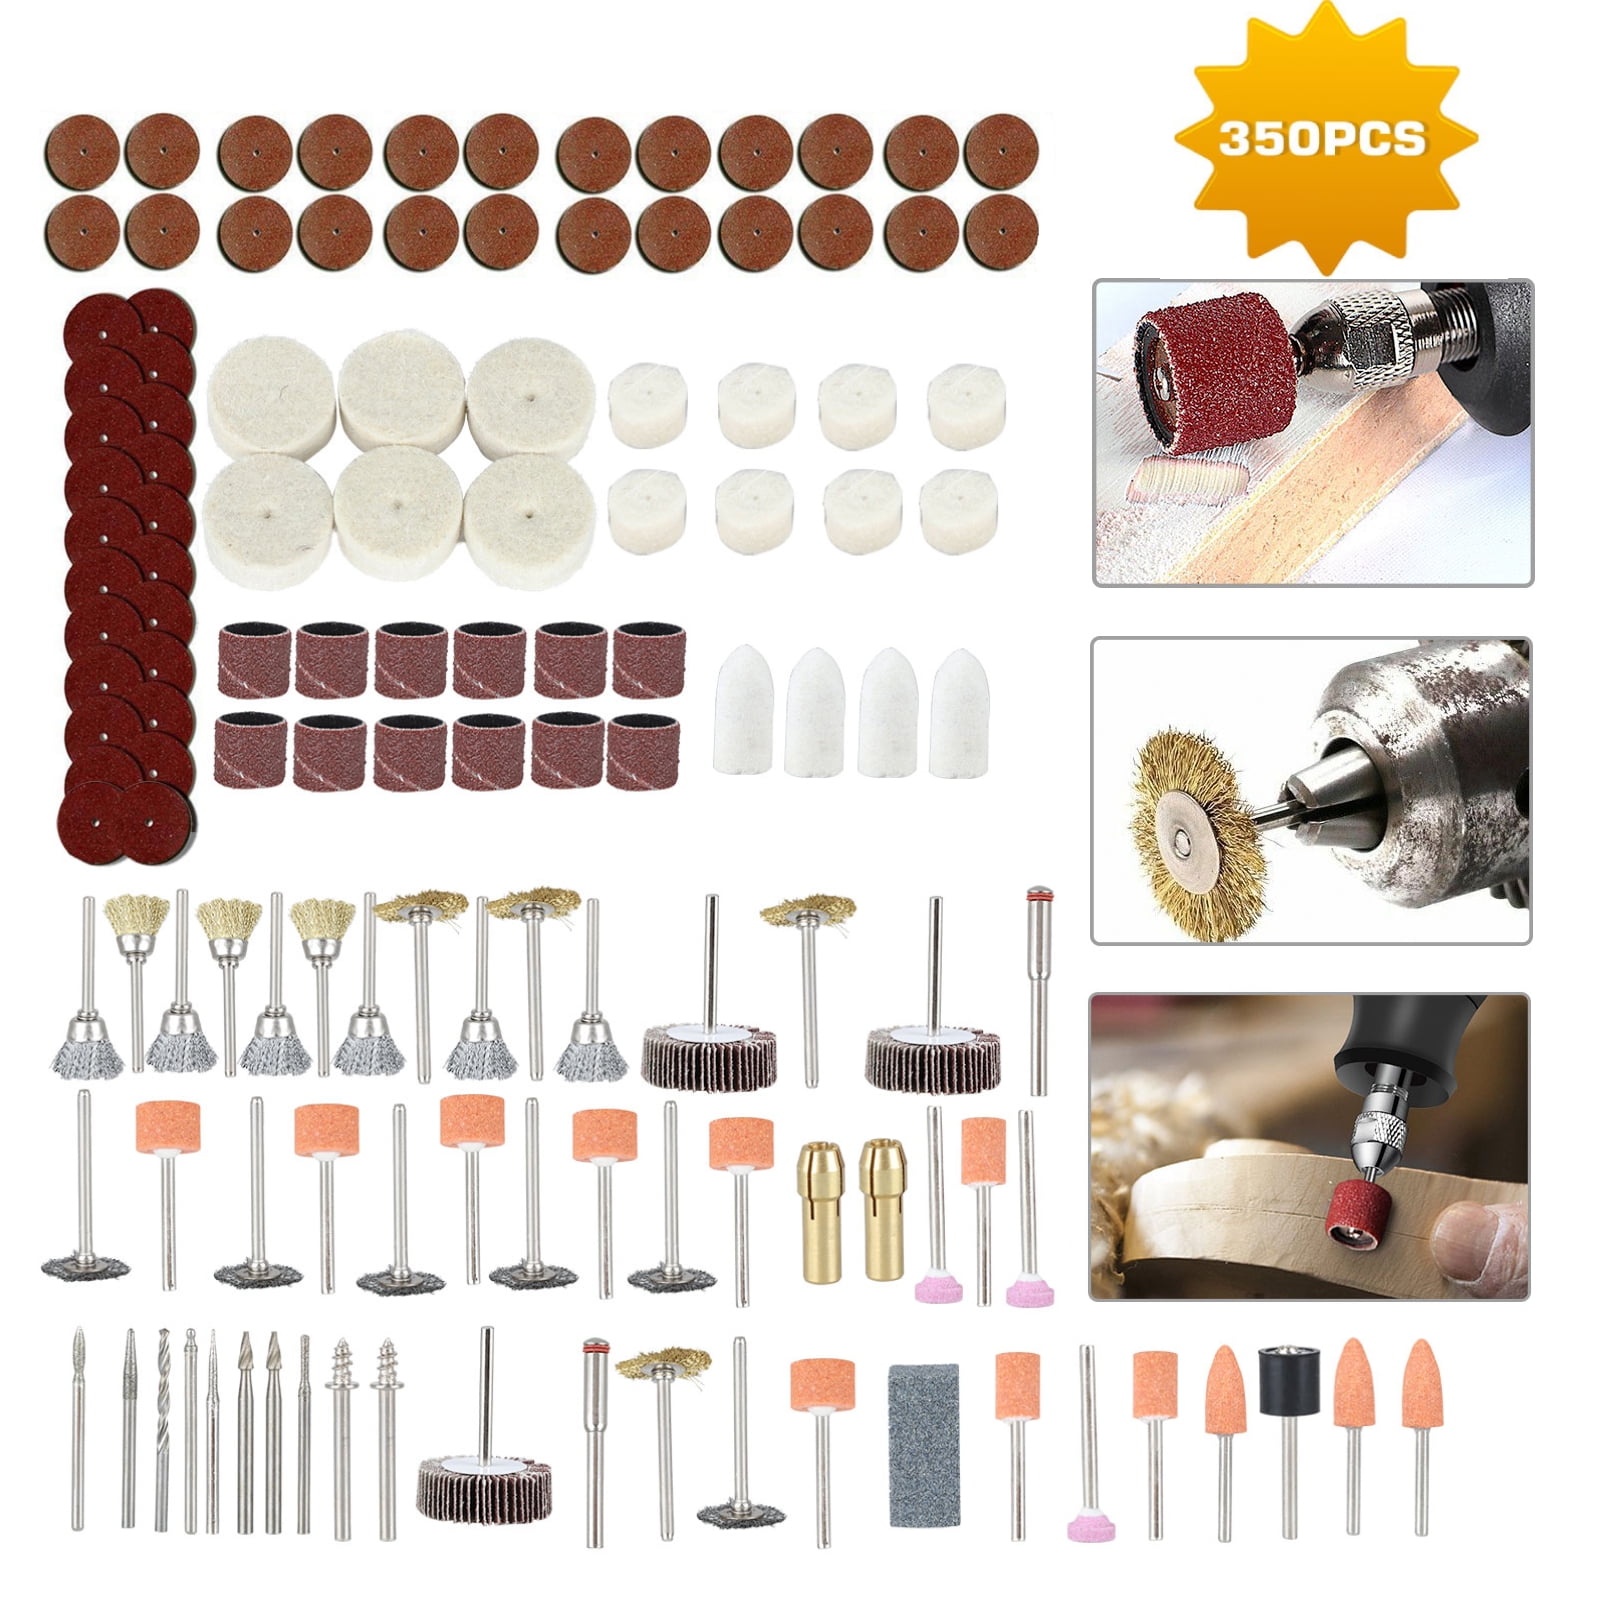 350pcs Rotary Tool Accessories Kit, EEEkit Sanding Cutting Grinder Set Fit  for Dremel Rotary Tool, Engraver Polisher Sander for Grinding, Sharpening